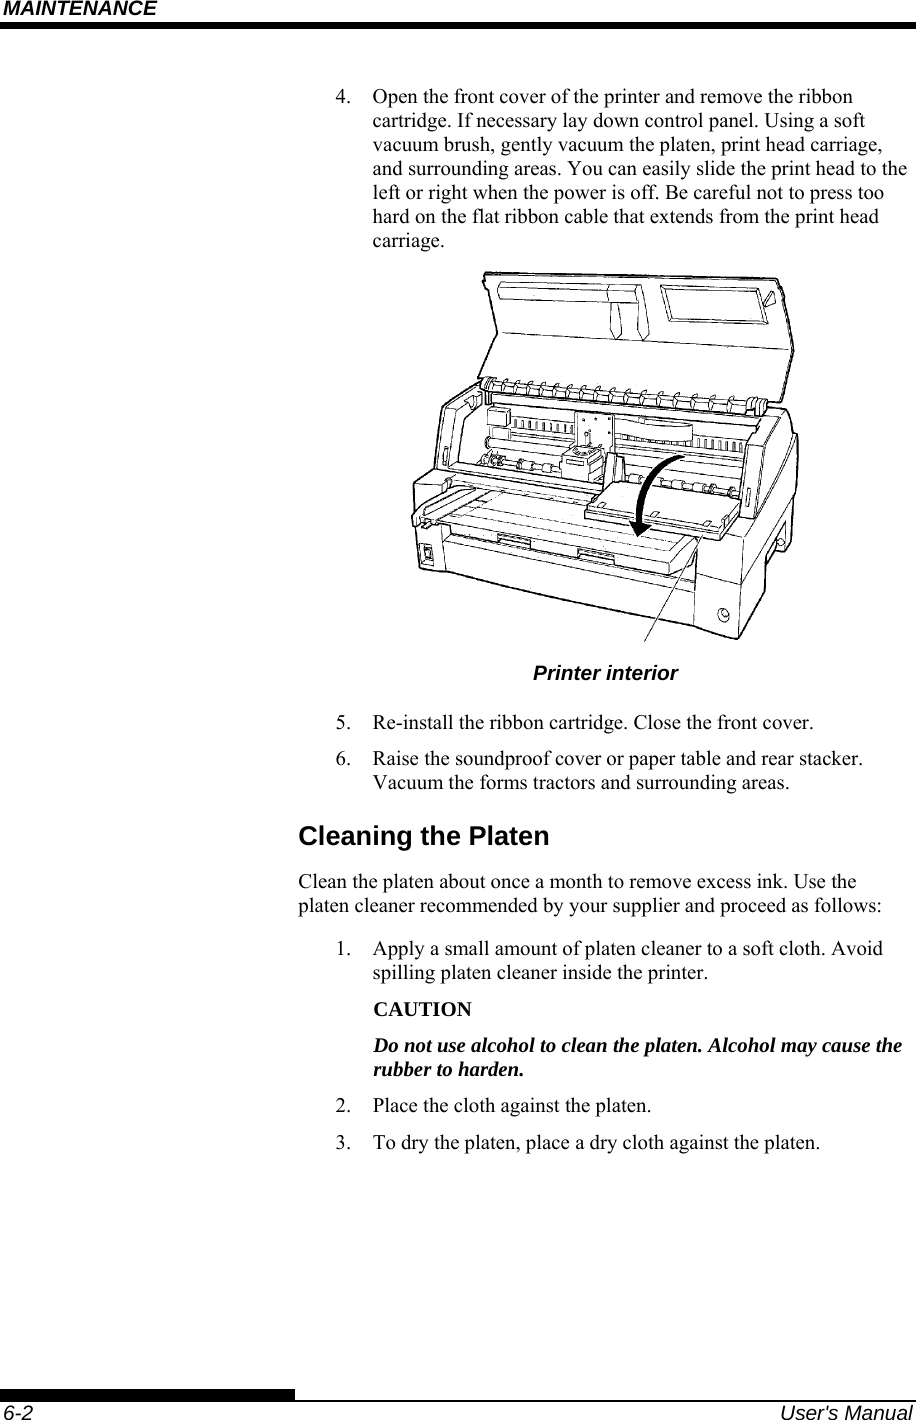 MAINTENANCE    6-2  User&apos;s Manual 4.  Open the front cover of the printer and remove the ribbon cartridge. If necessary lay down control panel. Using a soft vacuum brush, gently vacuum the platen, print head carriage, and surrounding areas. You can easily slide the print head to the left or right when the power is off. Be careful not to press too hard on the flat ribbon cable that extends from the print head carriage.  Printer interior 5.  Re-install the ribbon cartridge. Close the front cover. 6.  Raise the soundproof cover or paper table and rear stacker. Vacuum the forms tractors and surrounding areas. Cleaning the Platen Clean the platen about once a month to remove excess ink. Use the platen cleaner recommended by your supplier and proceed as follows: 1.  Apply a small amount of platen cleaner to a soft cloth. Avoid spilling platen cleaner inside the printer. CAUTION Do not use alcohol to clean the platen. Alcohol may cause the rubber to harden. 2.  Place the cloth against the platen. 3.  To dry the platen, place a dry cloth against the platen.  